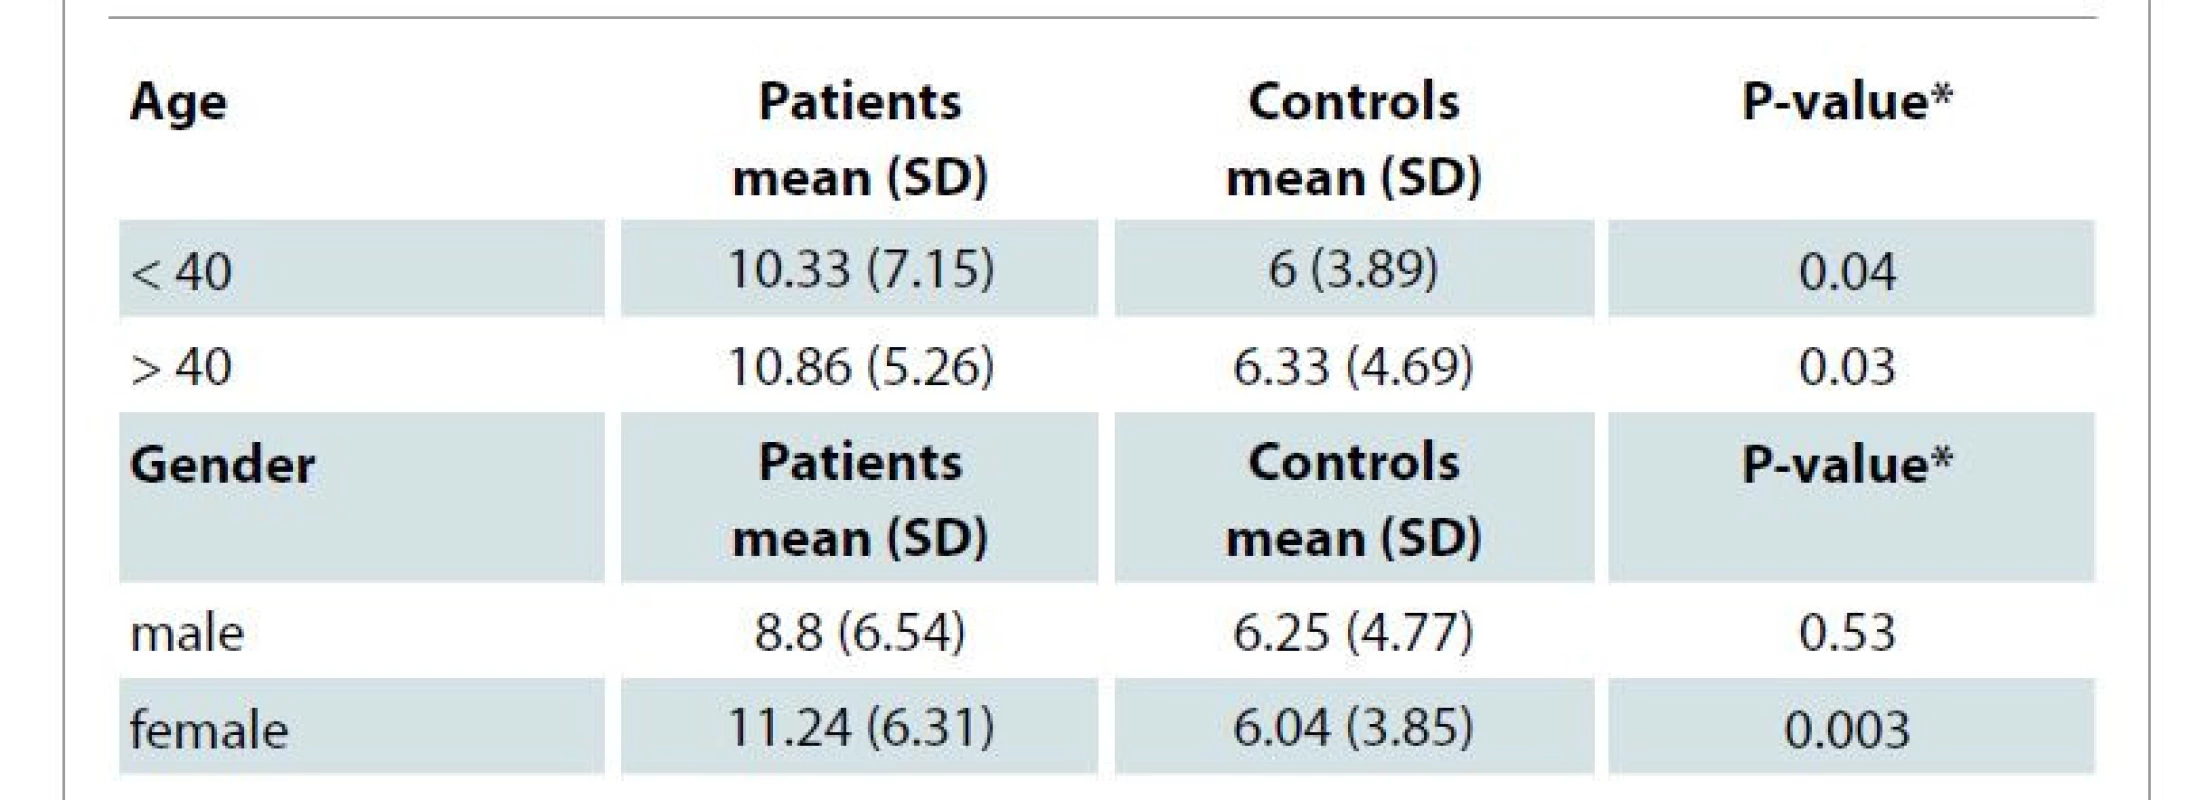 Comparison of depression score between patients in the two groups based
on the age and gender of patients.